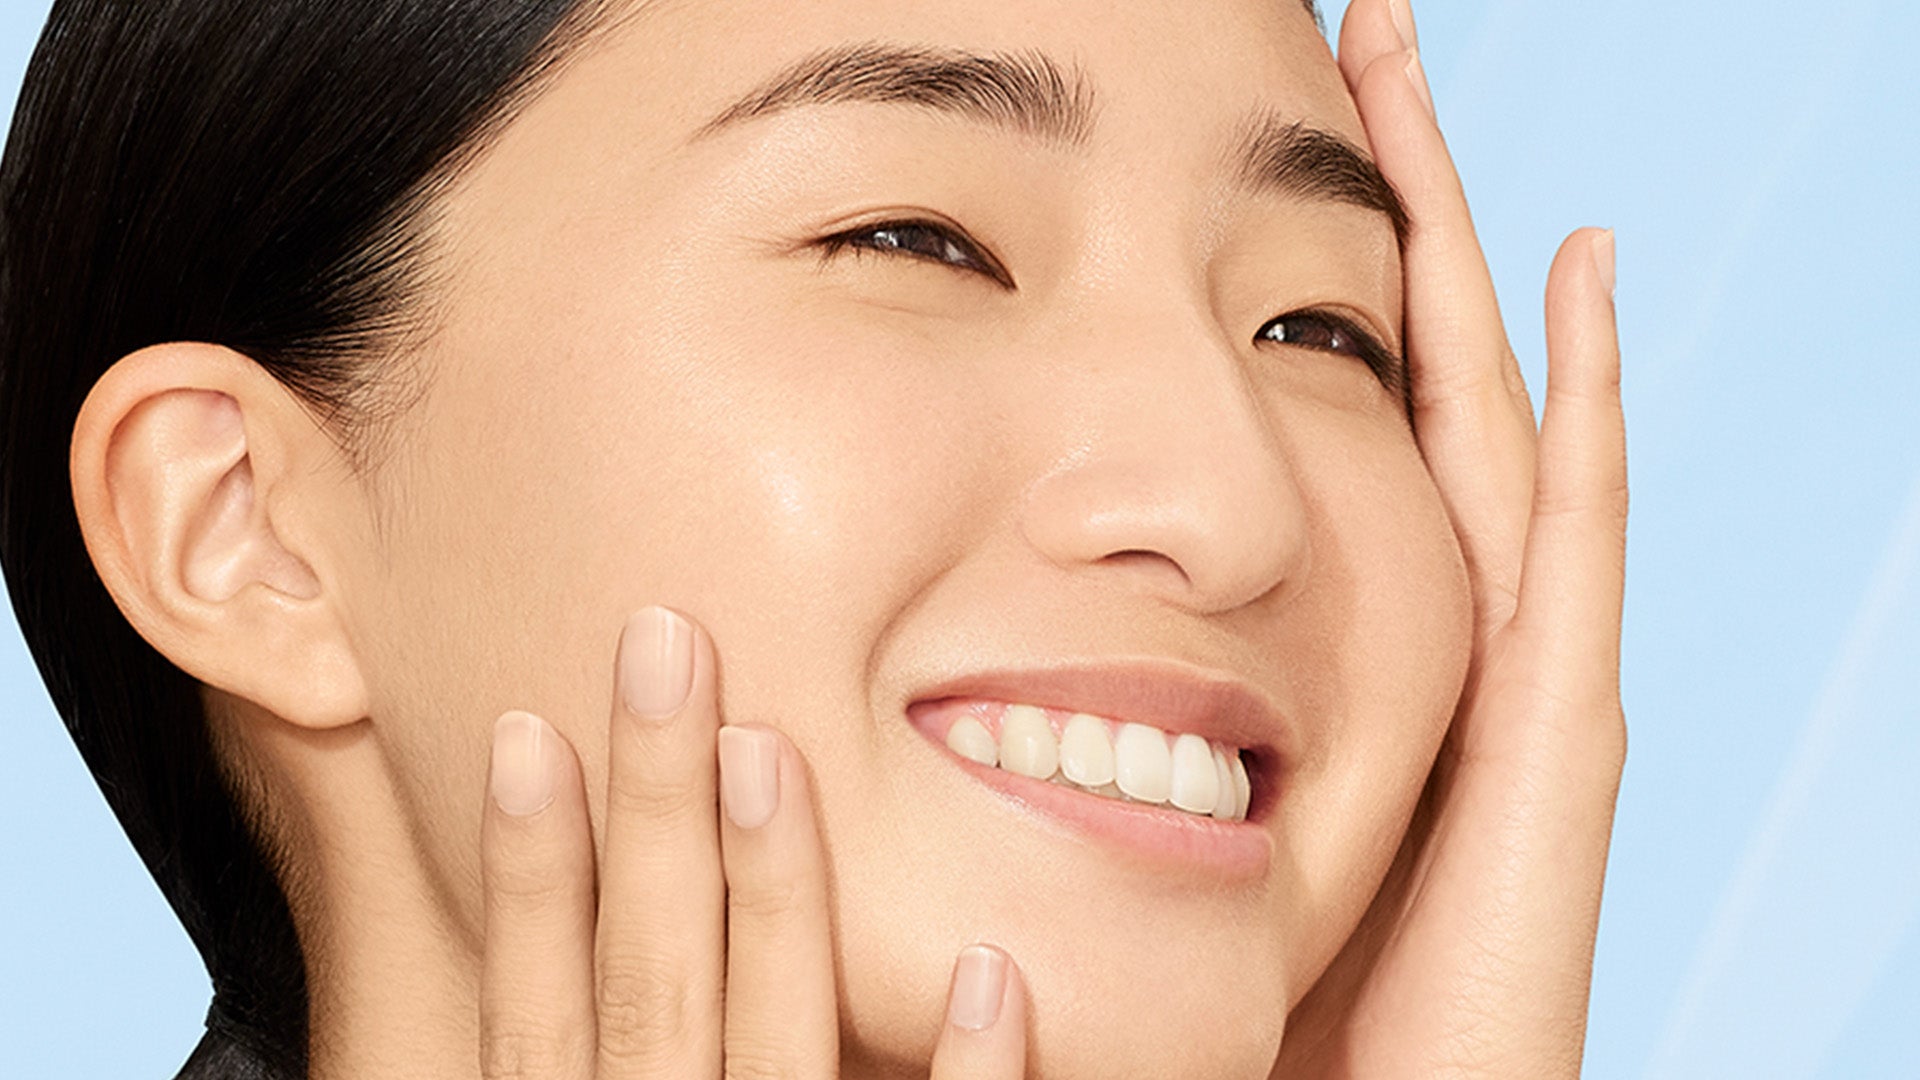 THE 5 COMMANDMENTS FOR CLEAR SKIN